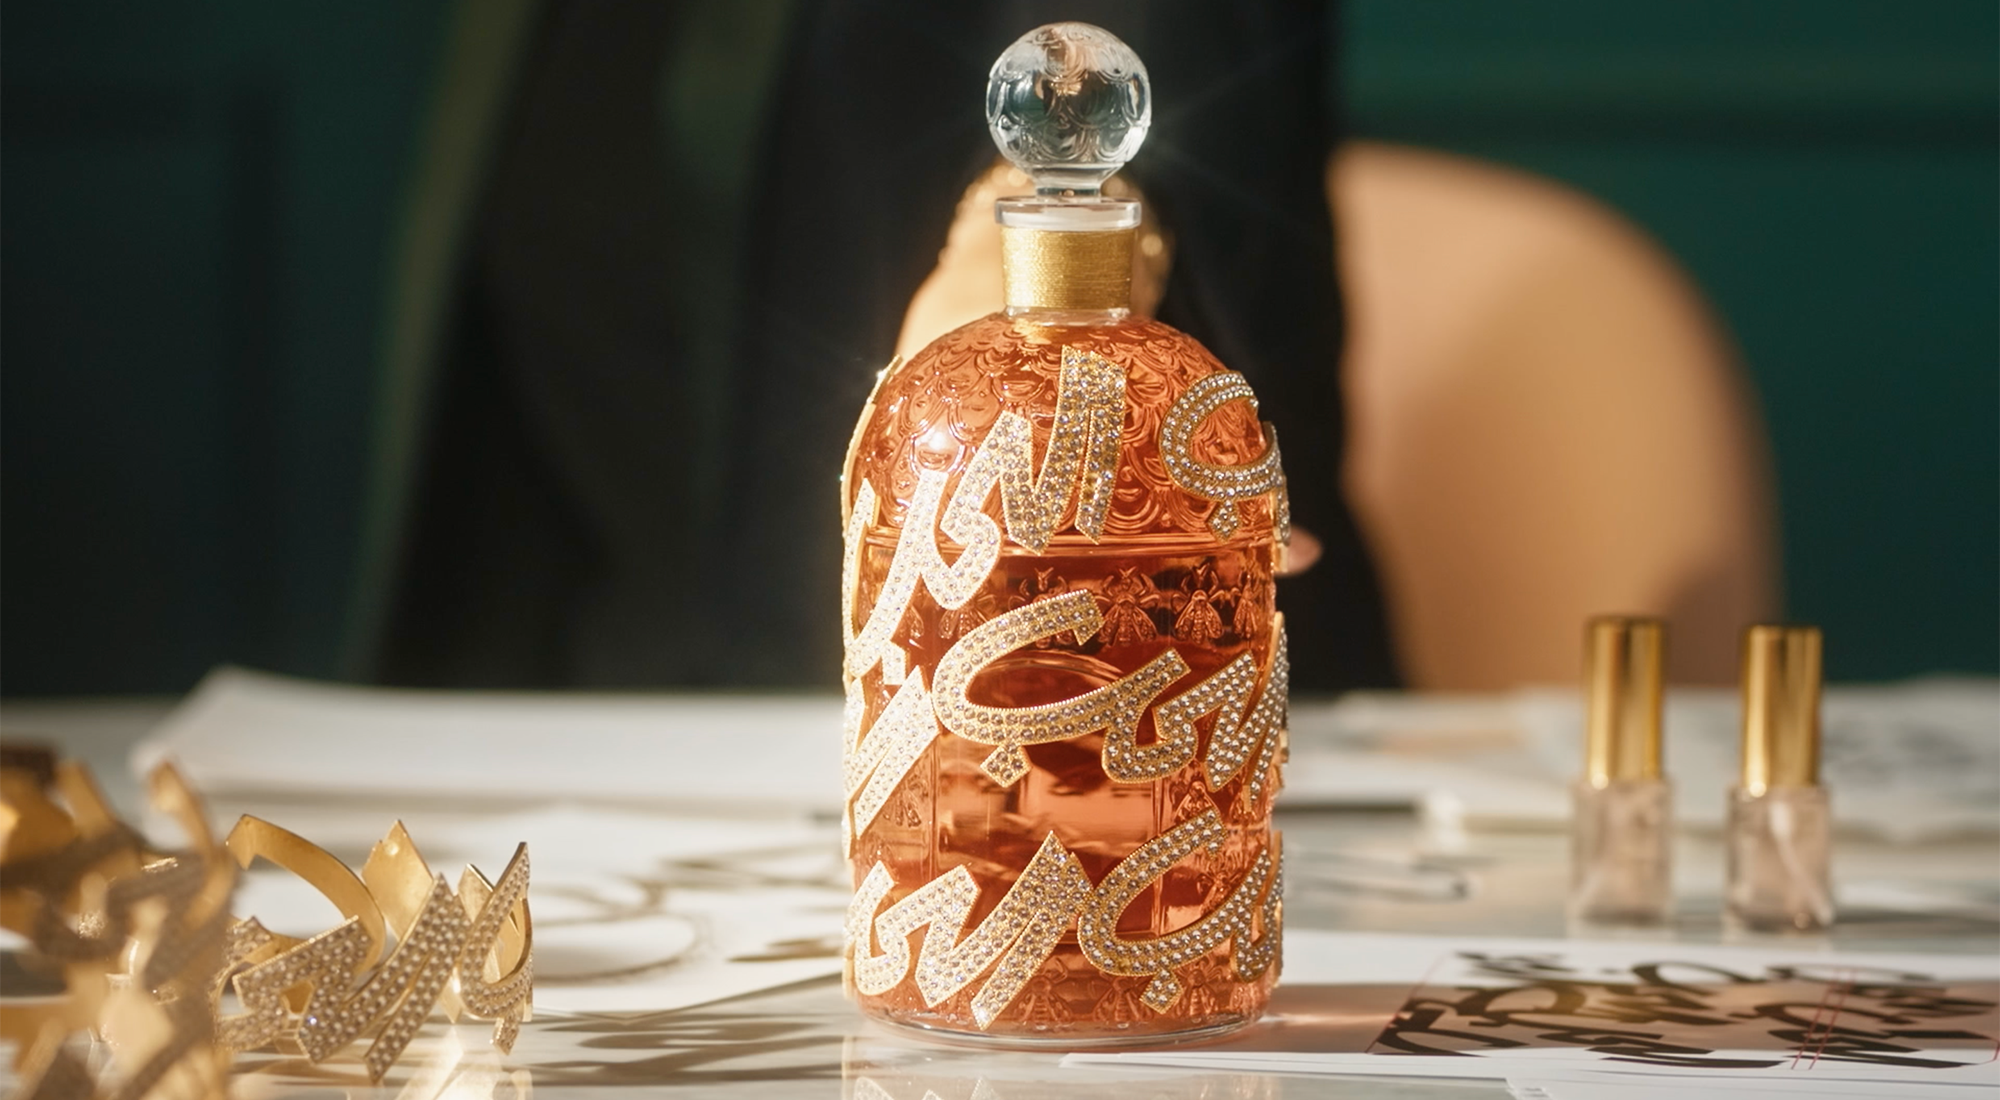 Celebrating One Year of Les Parfums Louis Vuitton